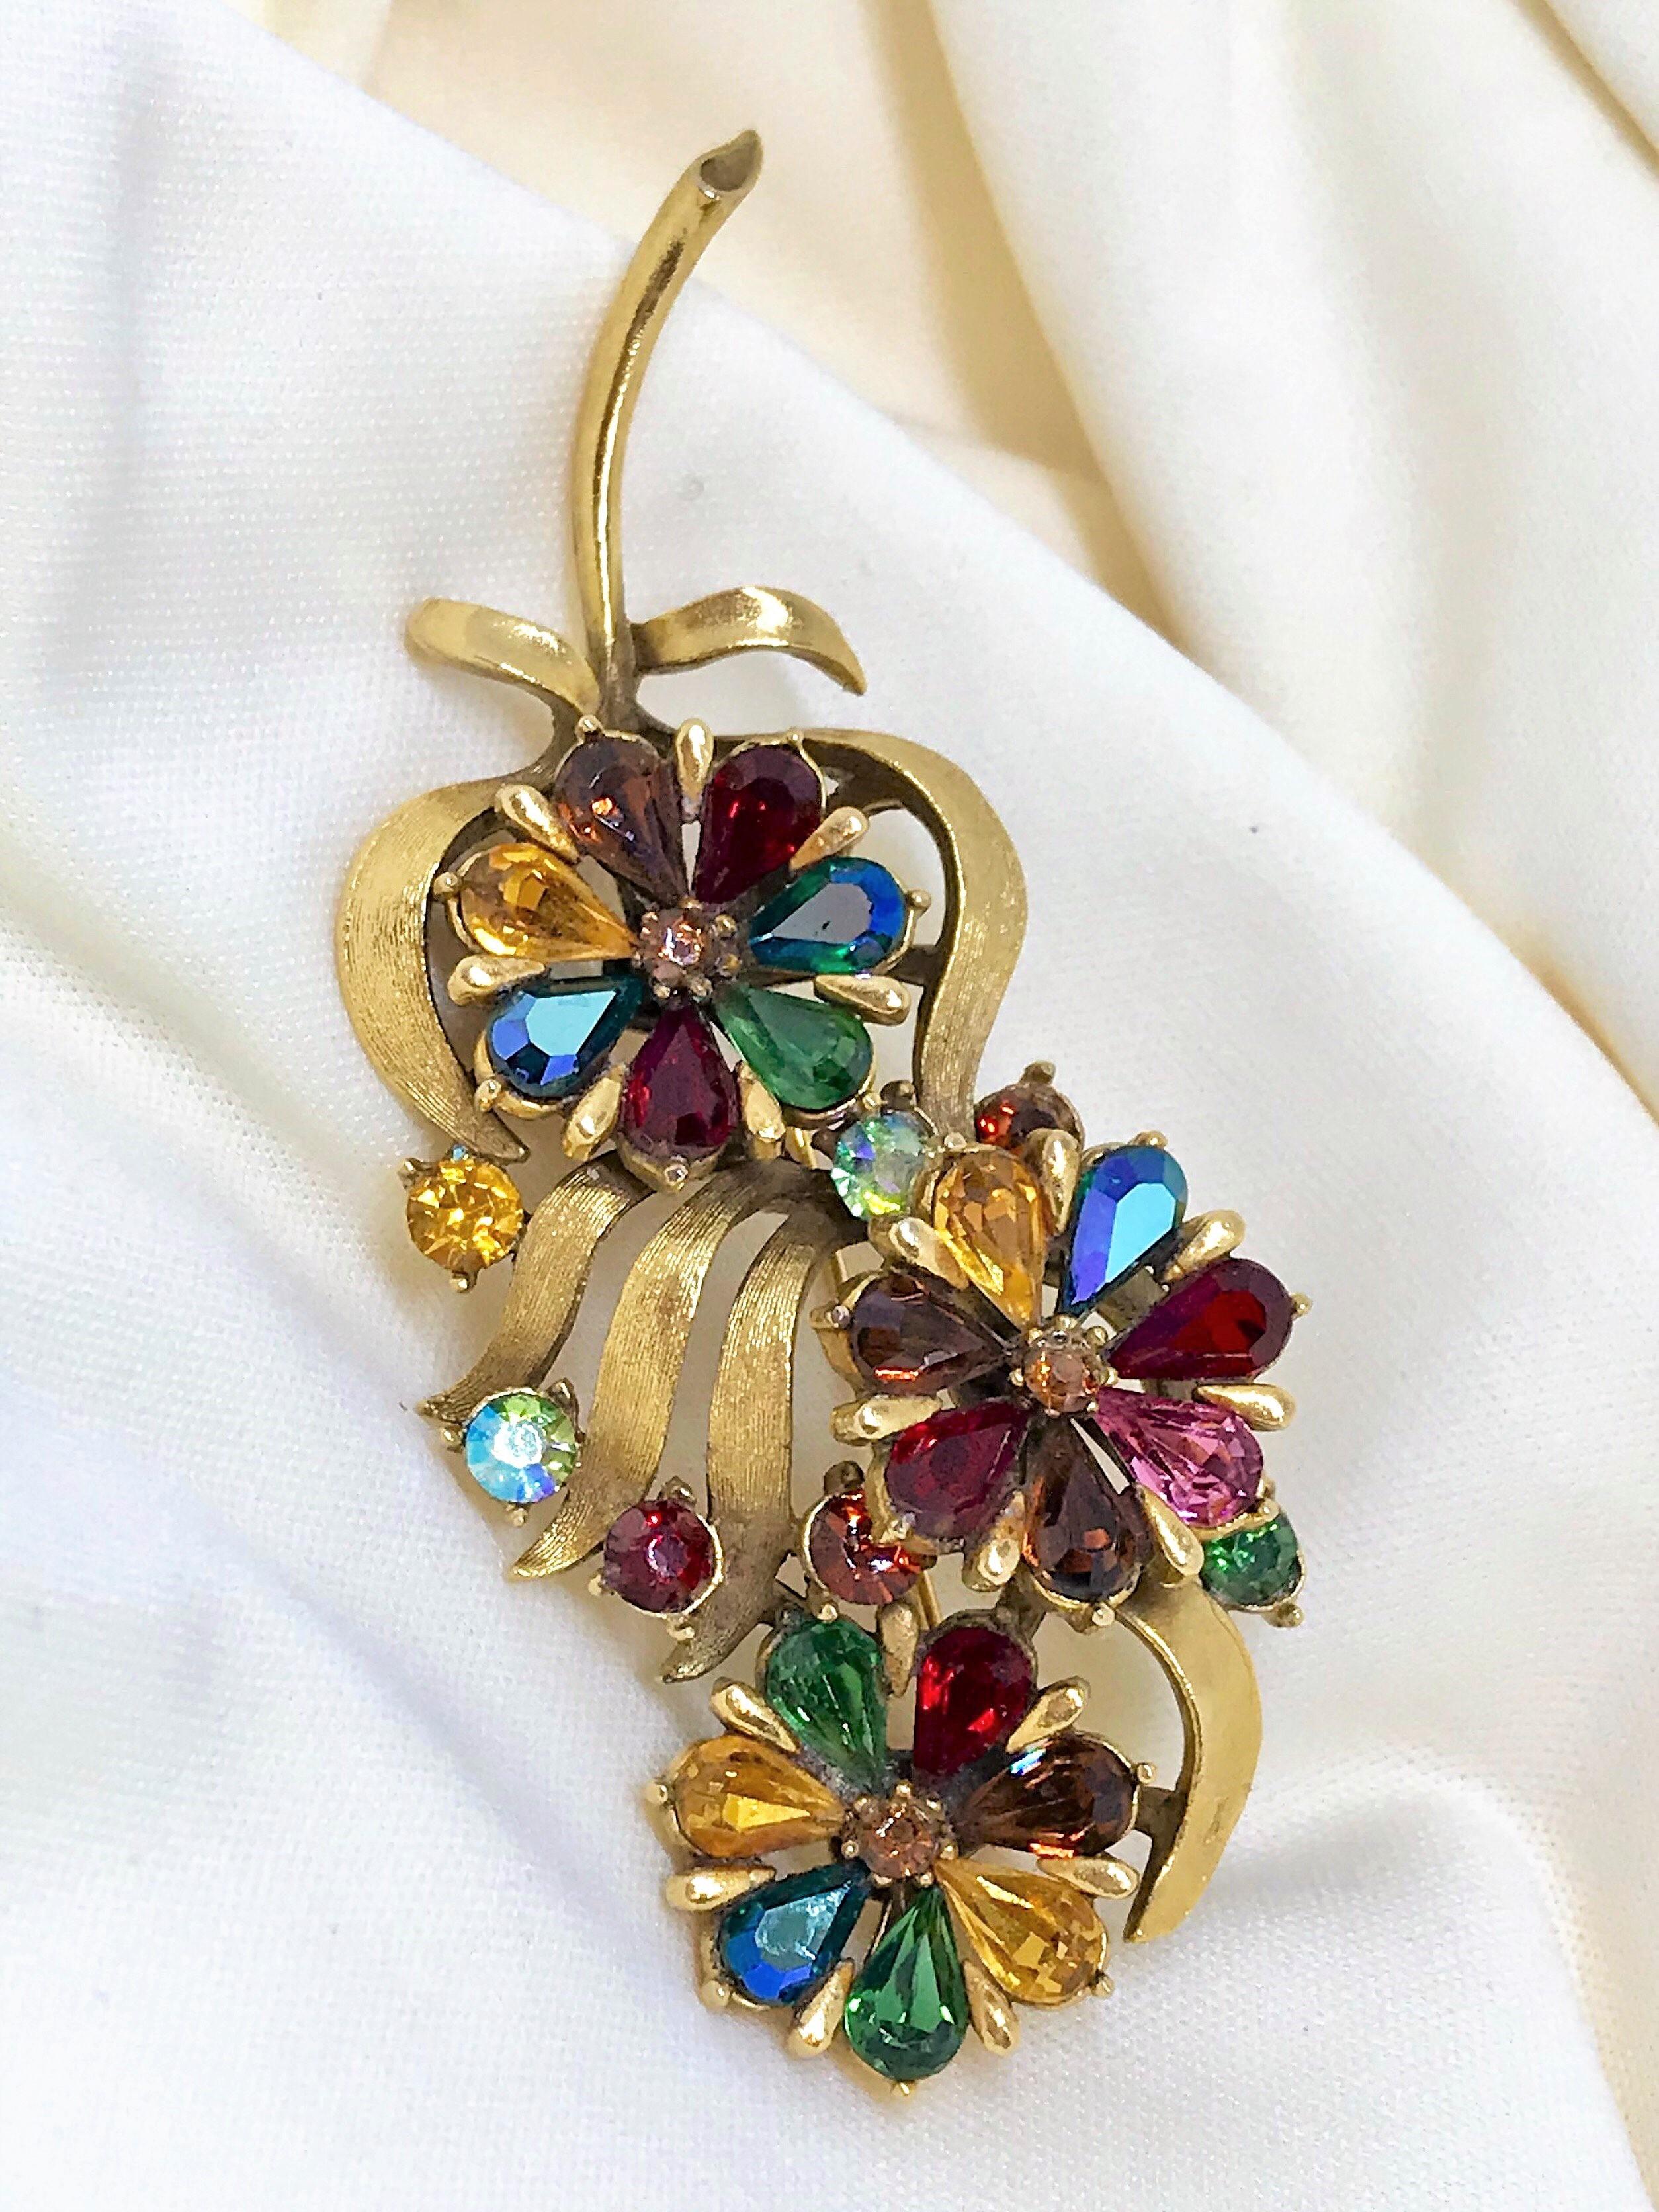 Women's or Men's Circa 1960s Coro Jewel-Tone Faceted Stone Brooch  For Sale